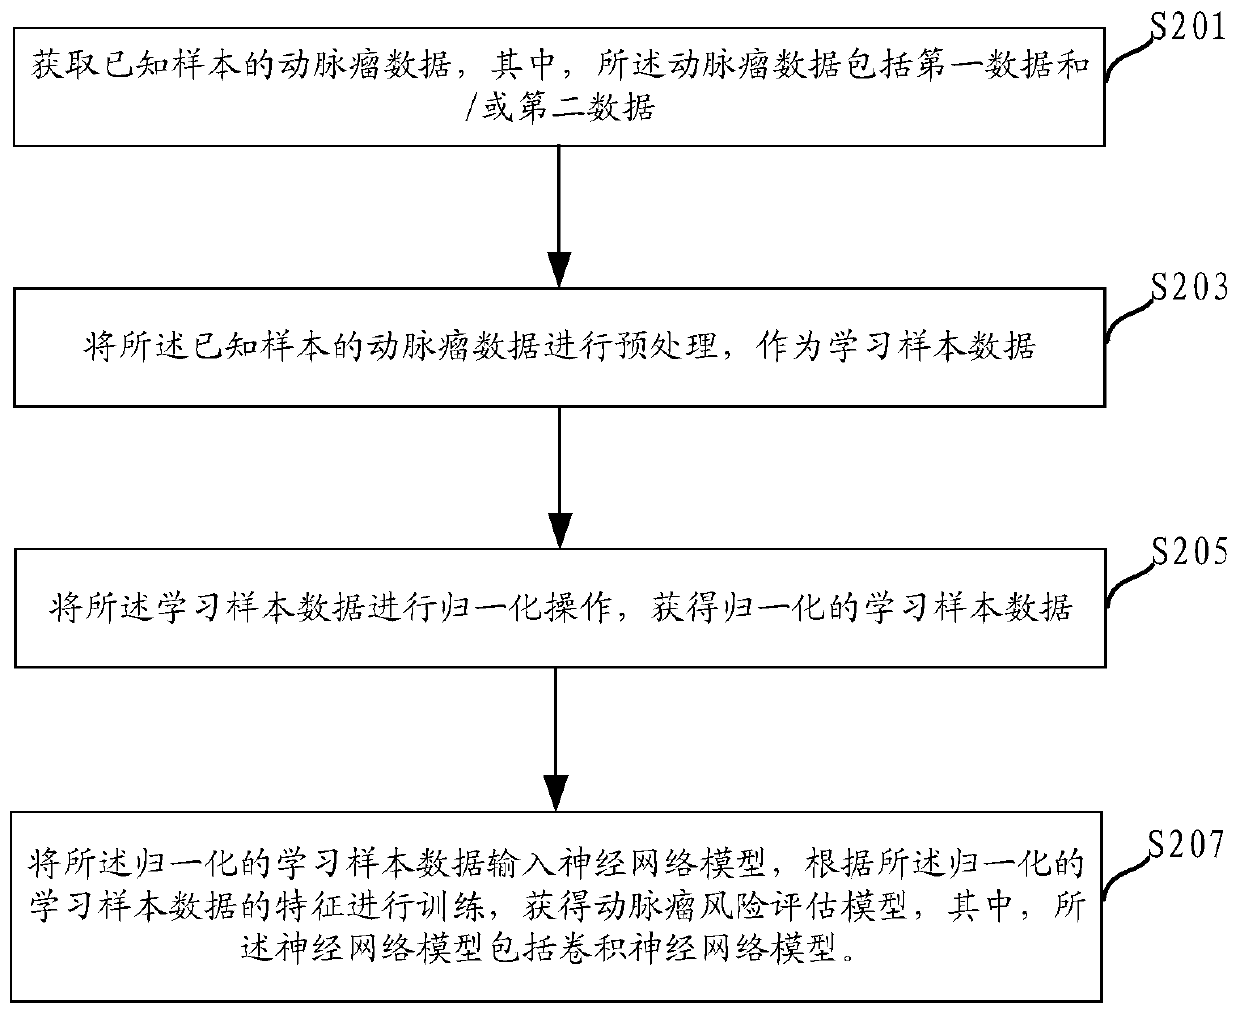 Aneurysm rupture risk assessment method and system